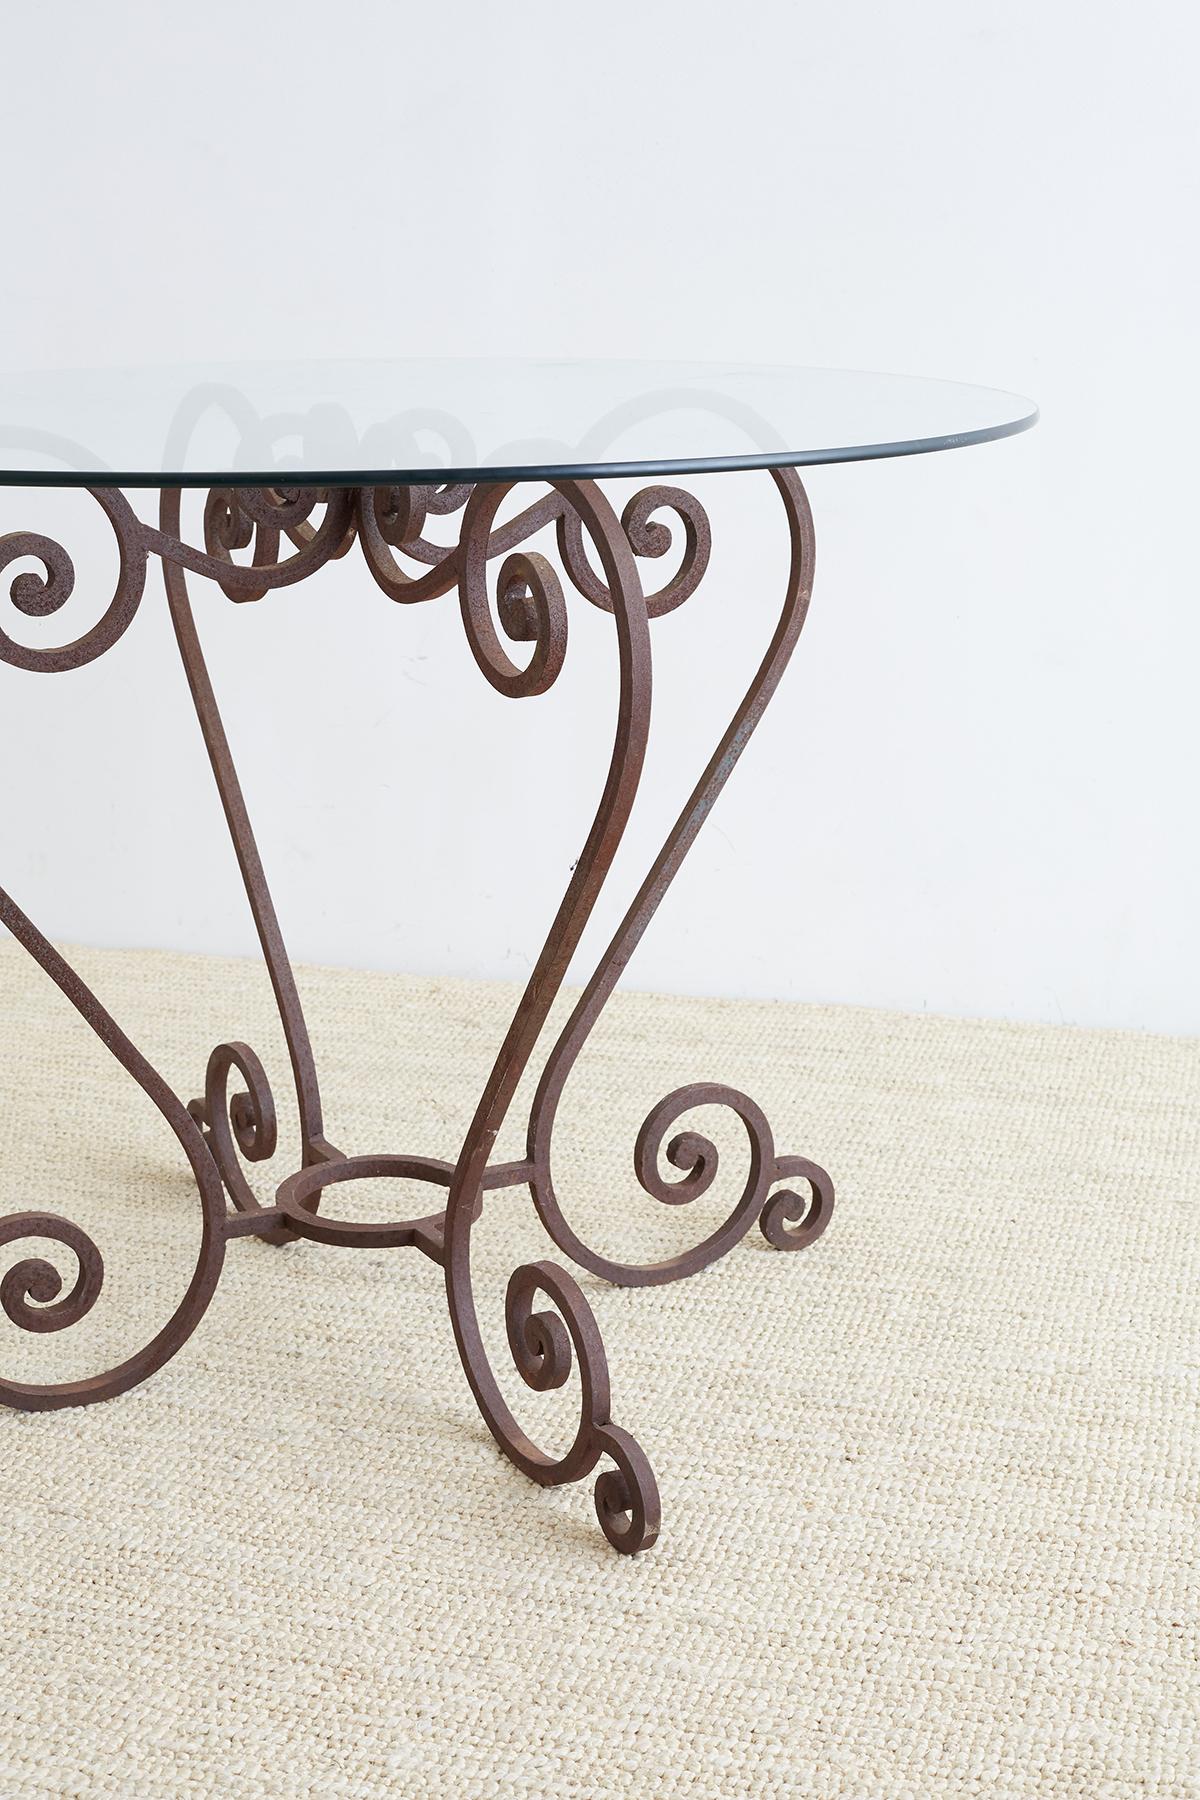 Elegant scrolled wrought iron breakfast table or patio garden table featuring four large S scrolls. Conjoined on top and bottom with scrolls on top and a ring stretcher on bottom. Each leg has a small scrolled foot. The table is constructed from